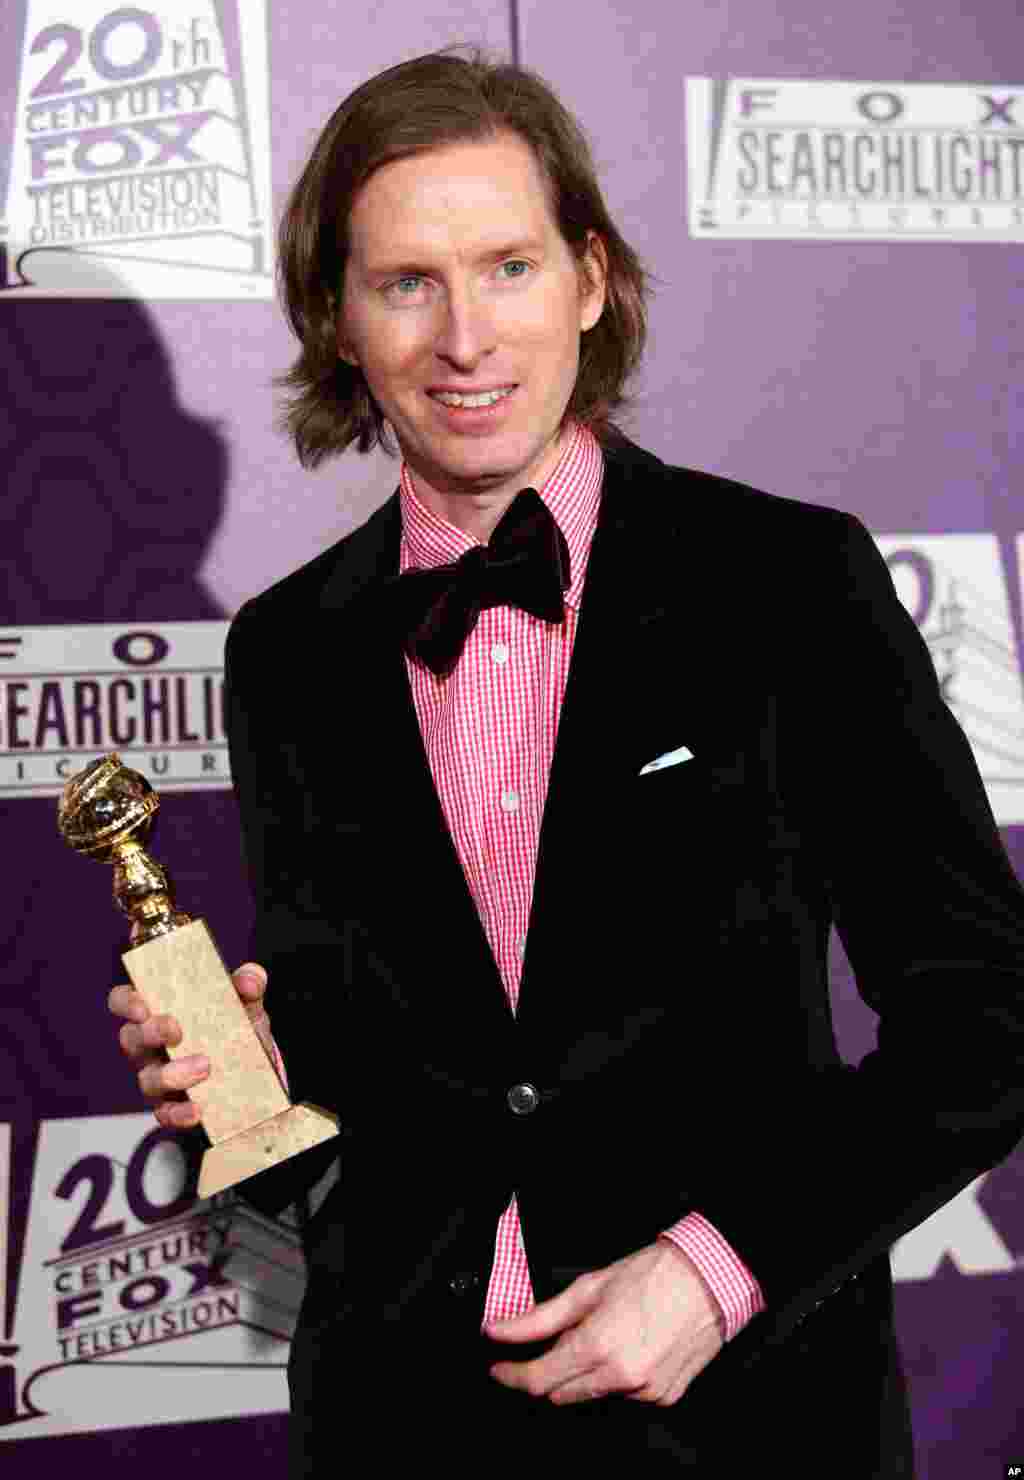 Director Wes Anderson, who won Best Motion Picture - Comedy or Musical for &quot;The Grand Budapest Hotel,&quot; makes an appearance at the Fox Searchlight Golden Globes afterparty at the Beverly Hilton Hotel, in Beverly Hills, California, Jan. 11, 2015.